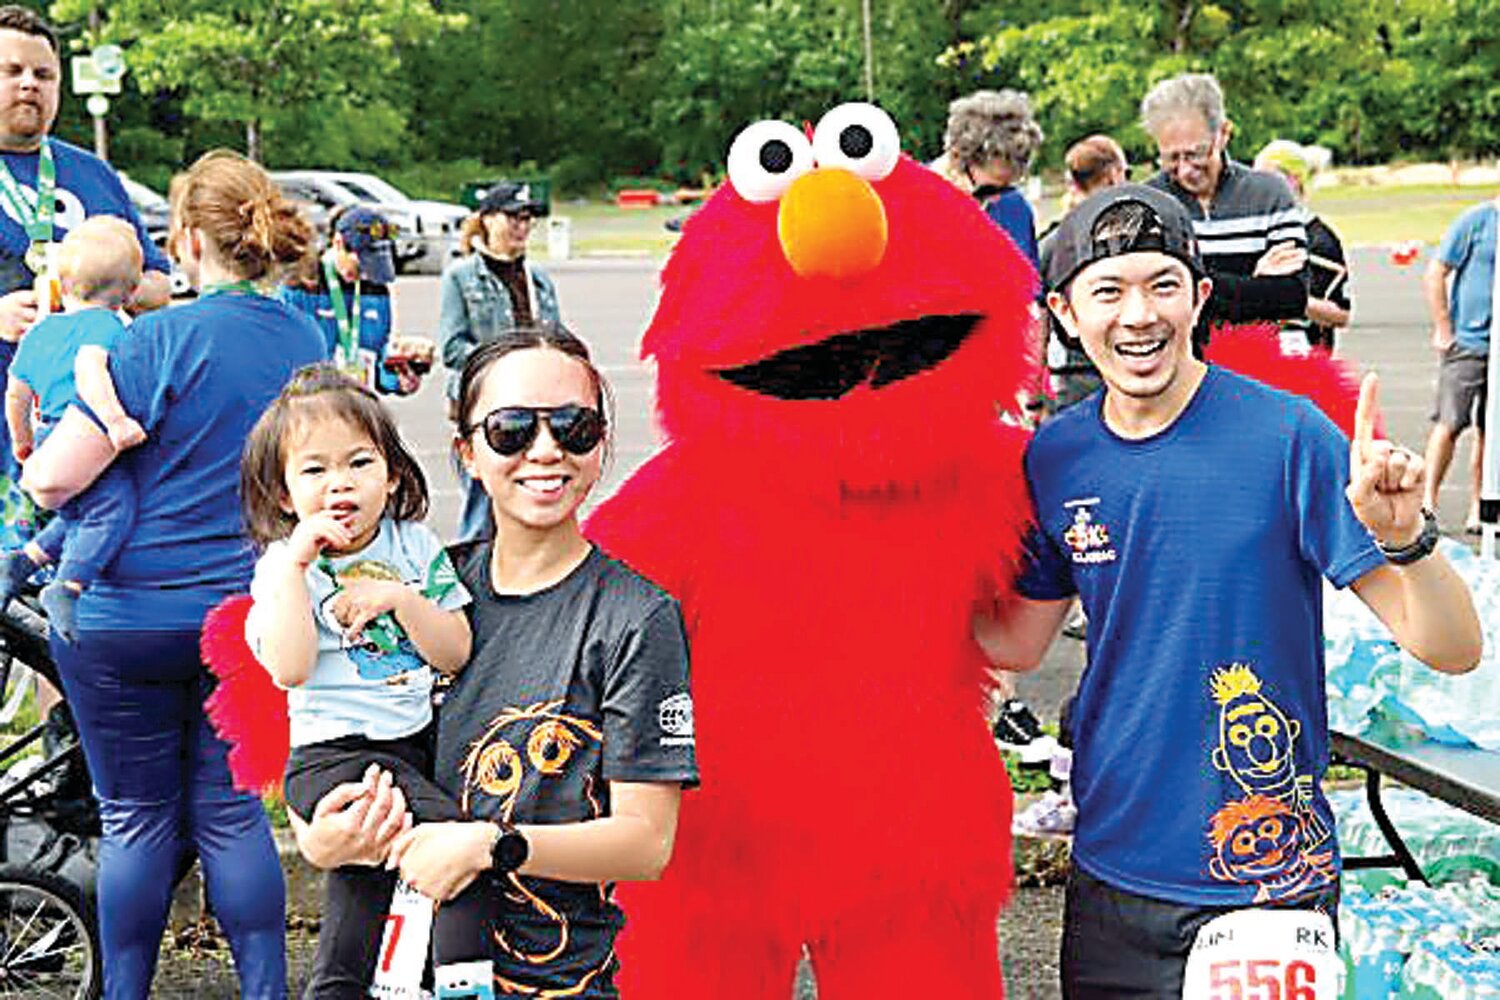 The Justin Woo family of New York City gets a chance to say hello to Sesame character Elmo during a meet-and-greet at Sunday’s Kiwanis-Herald Sesame Place Classic in Langhorne.